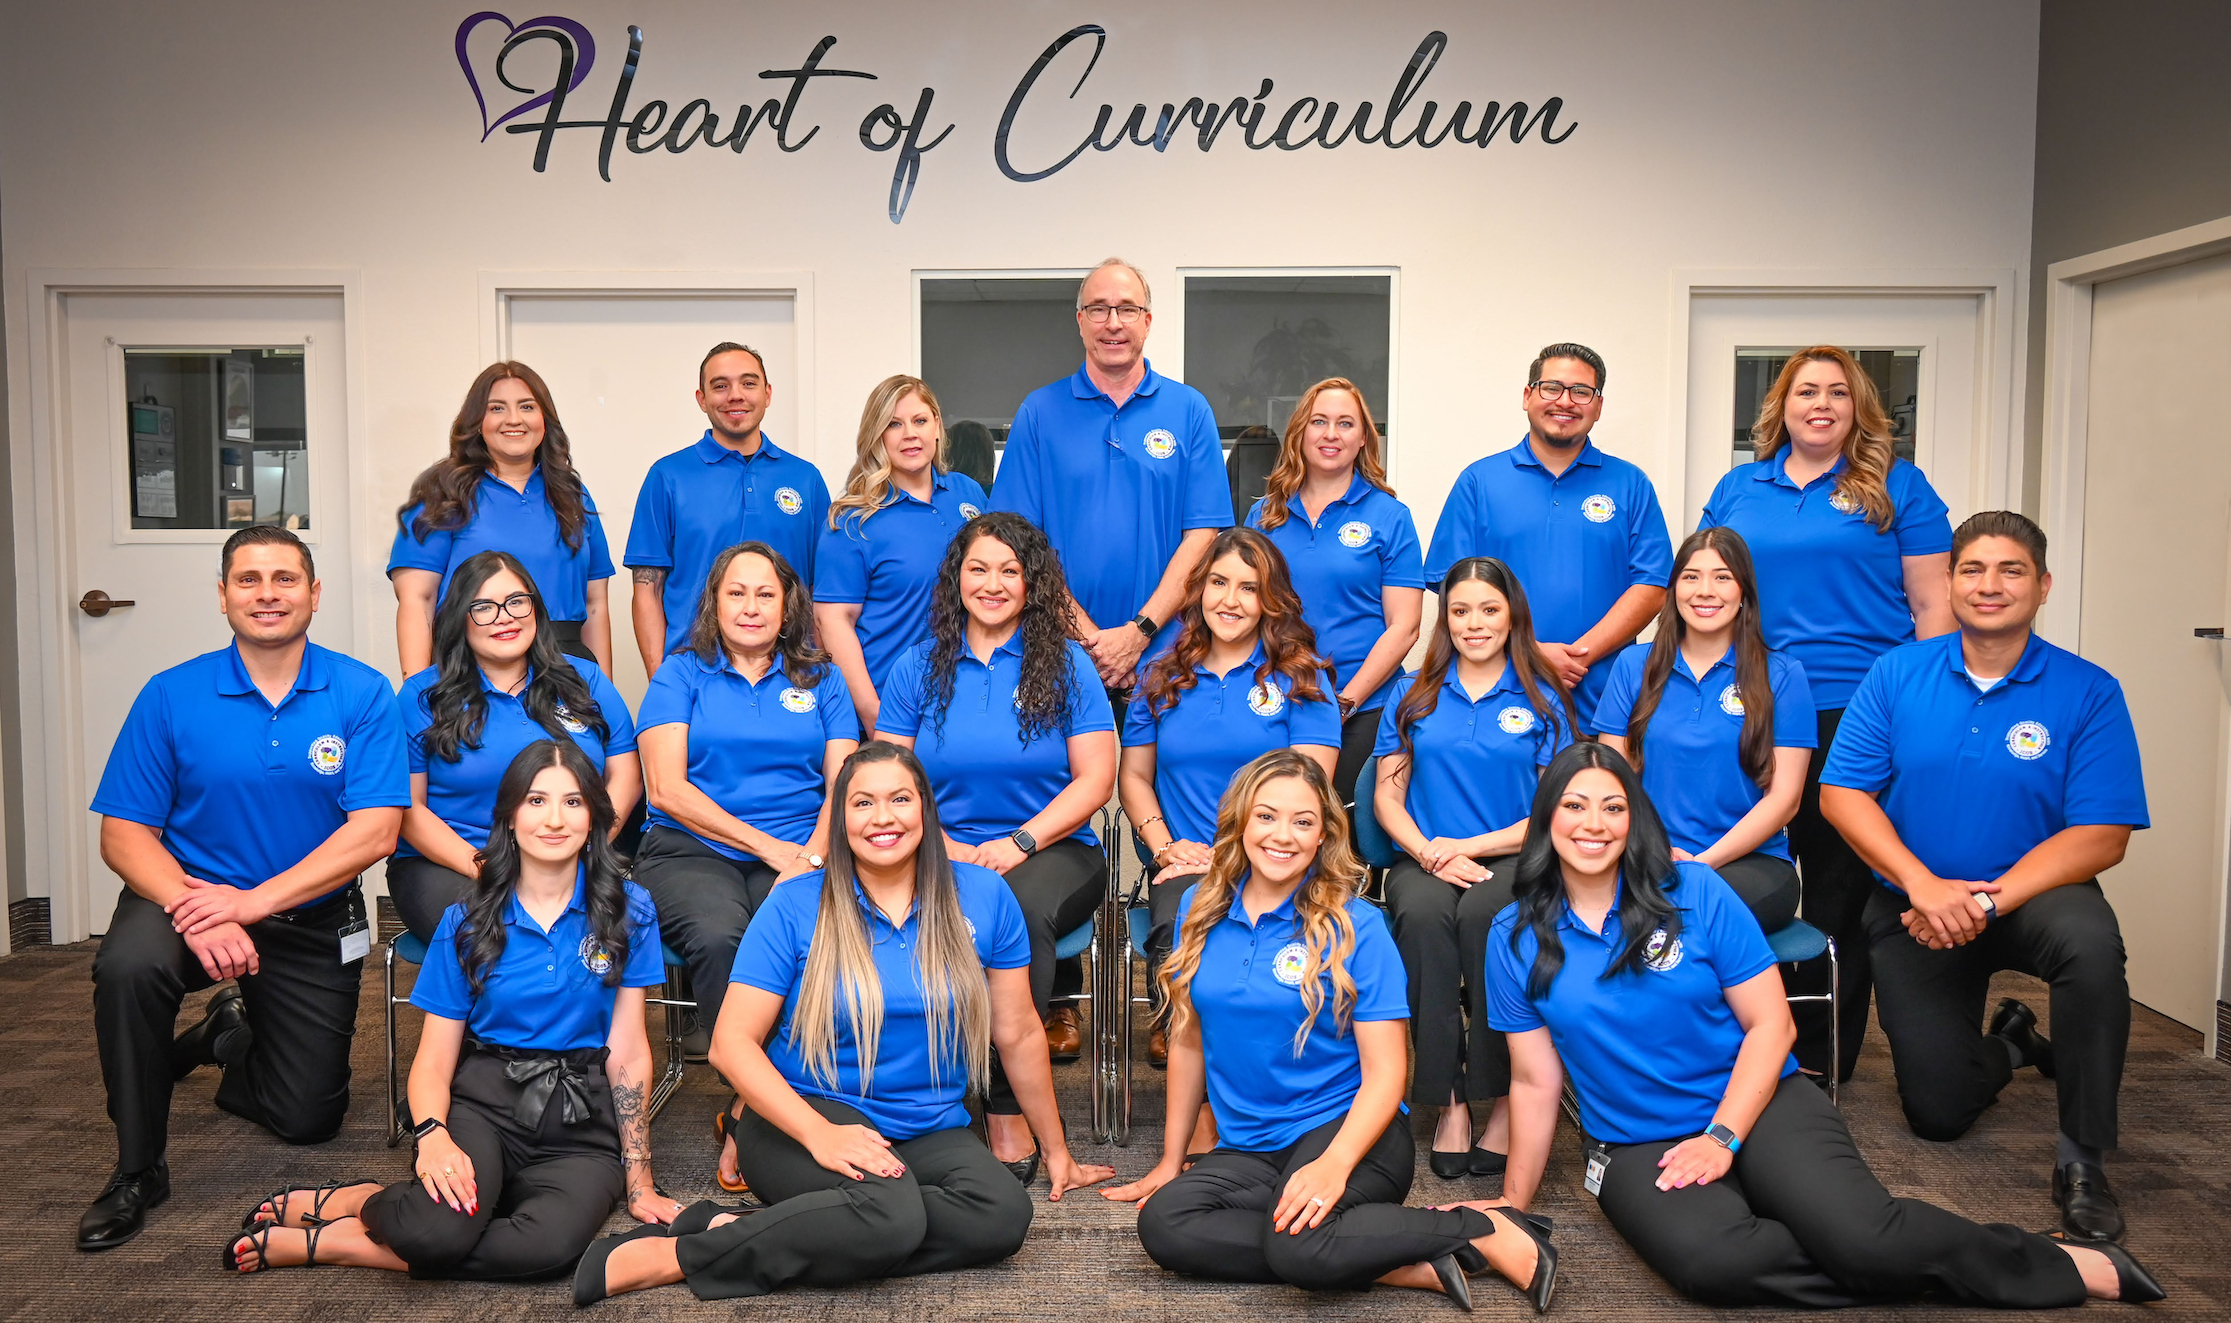 Heart of Curriculum - Group Photo